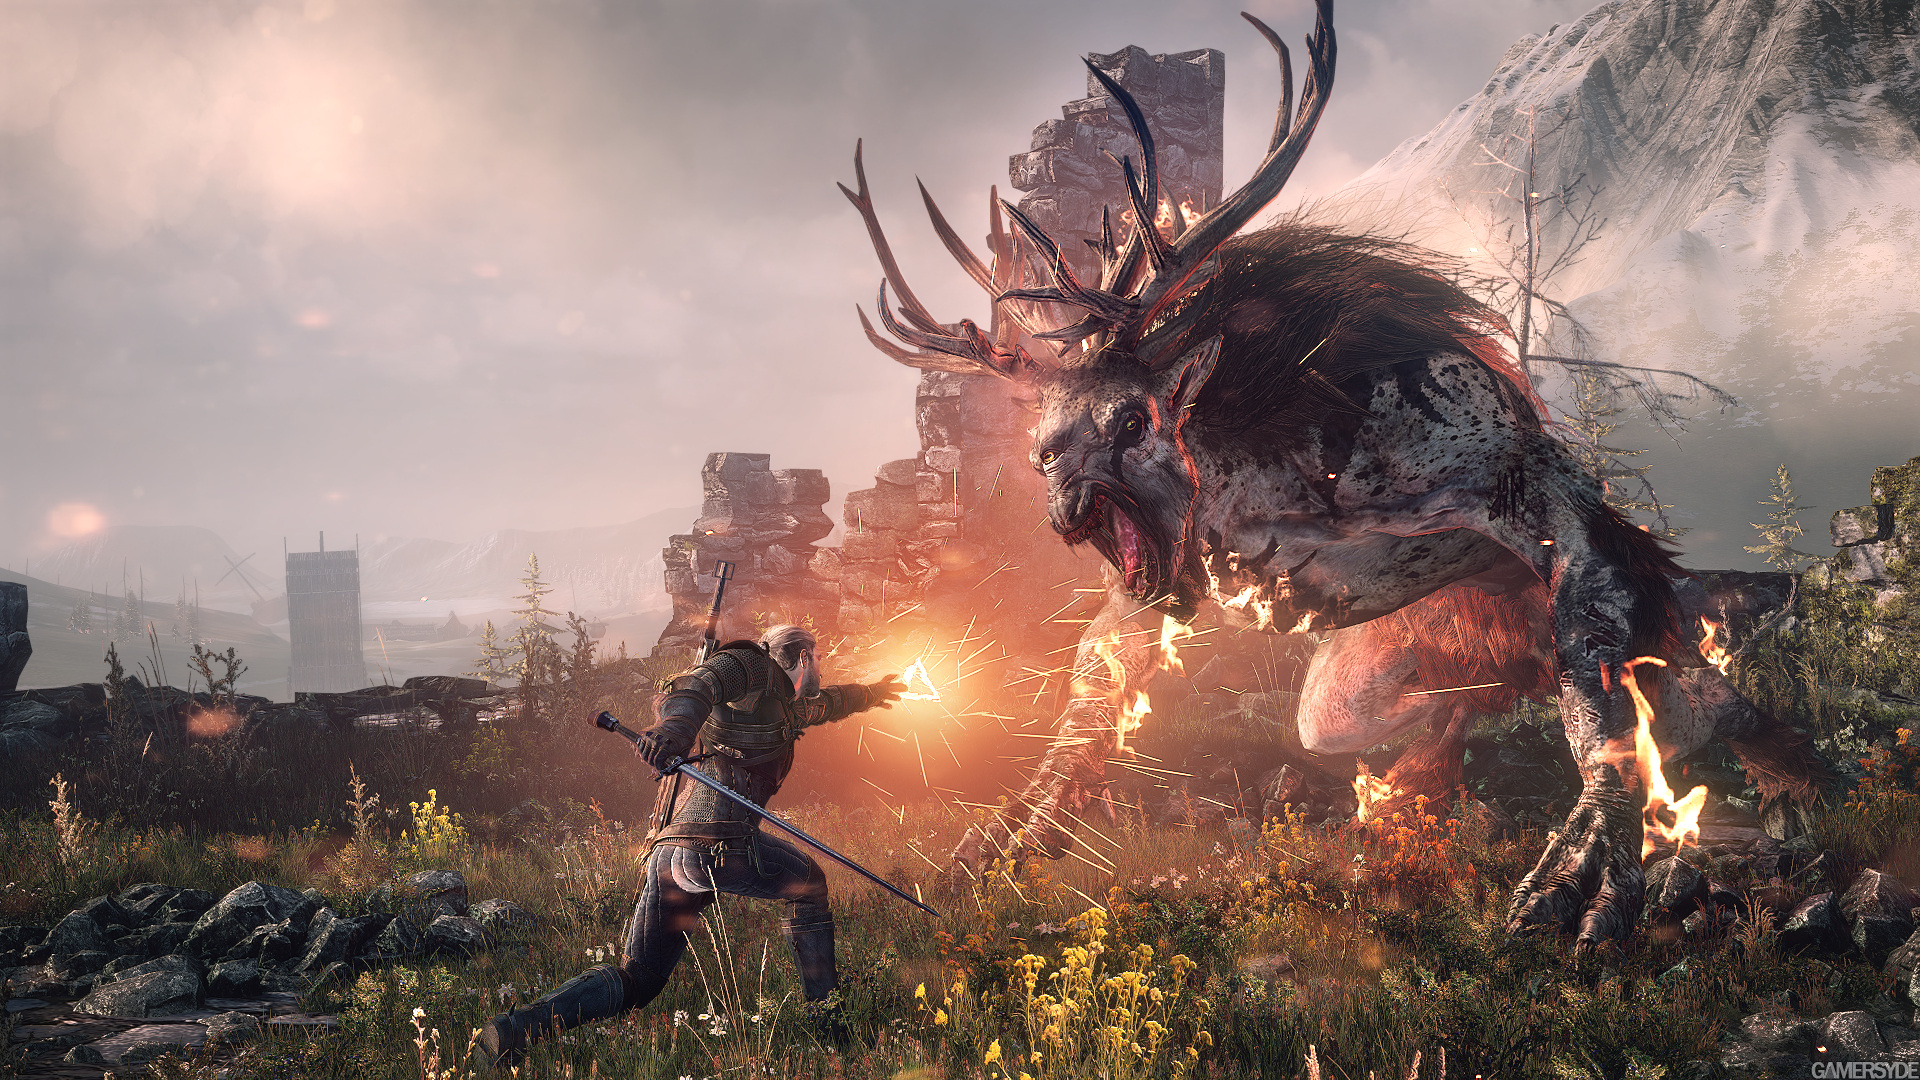 Witcher 3 Image_the_witcher_3_wild_hunt-22370-2651_0001